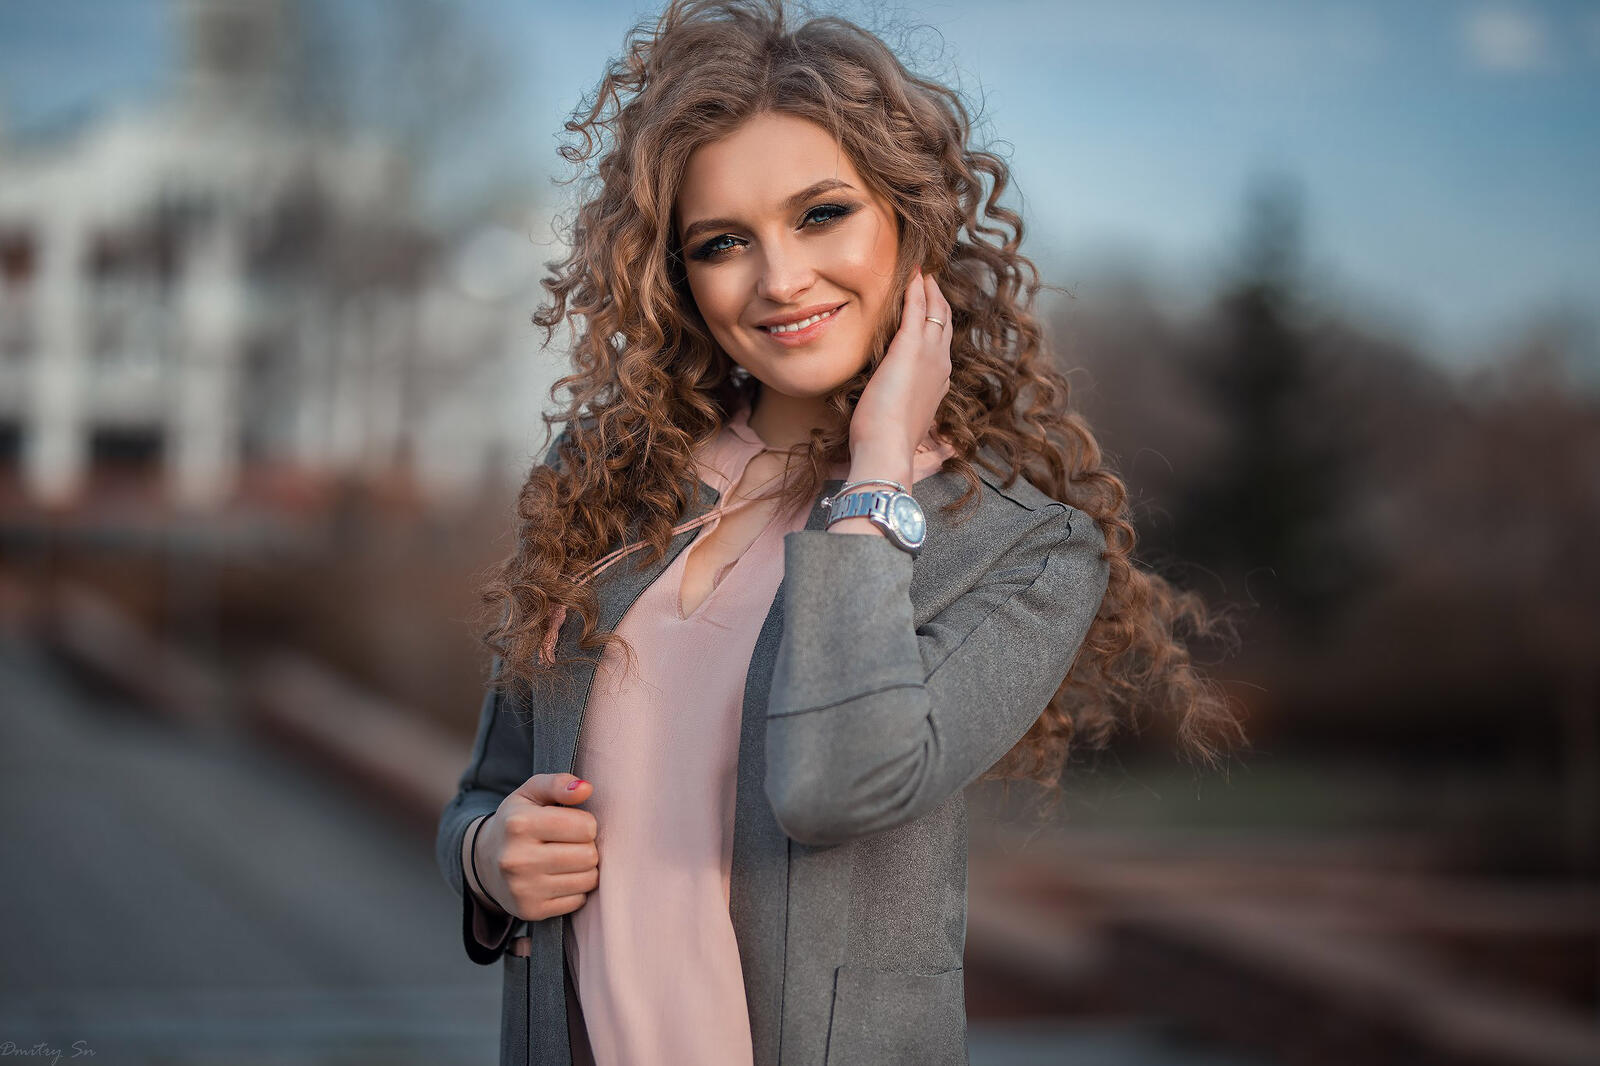 Wallpapers girls fashion model curly hair on the desktop